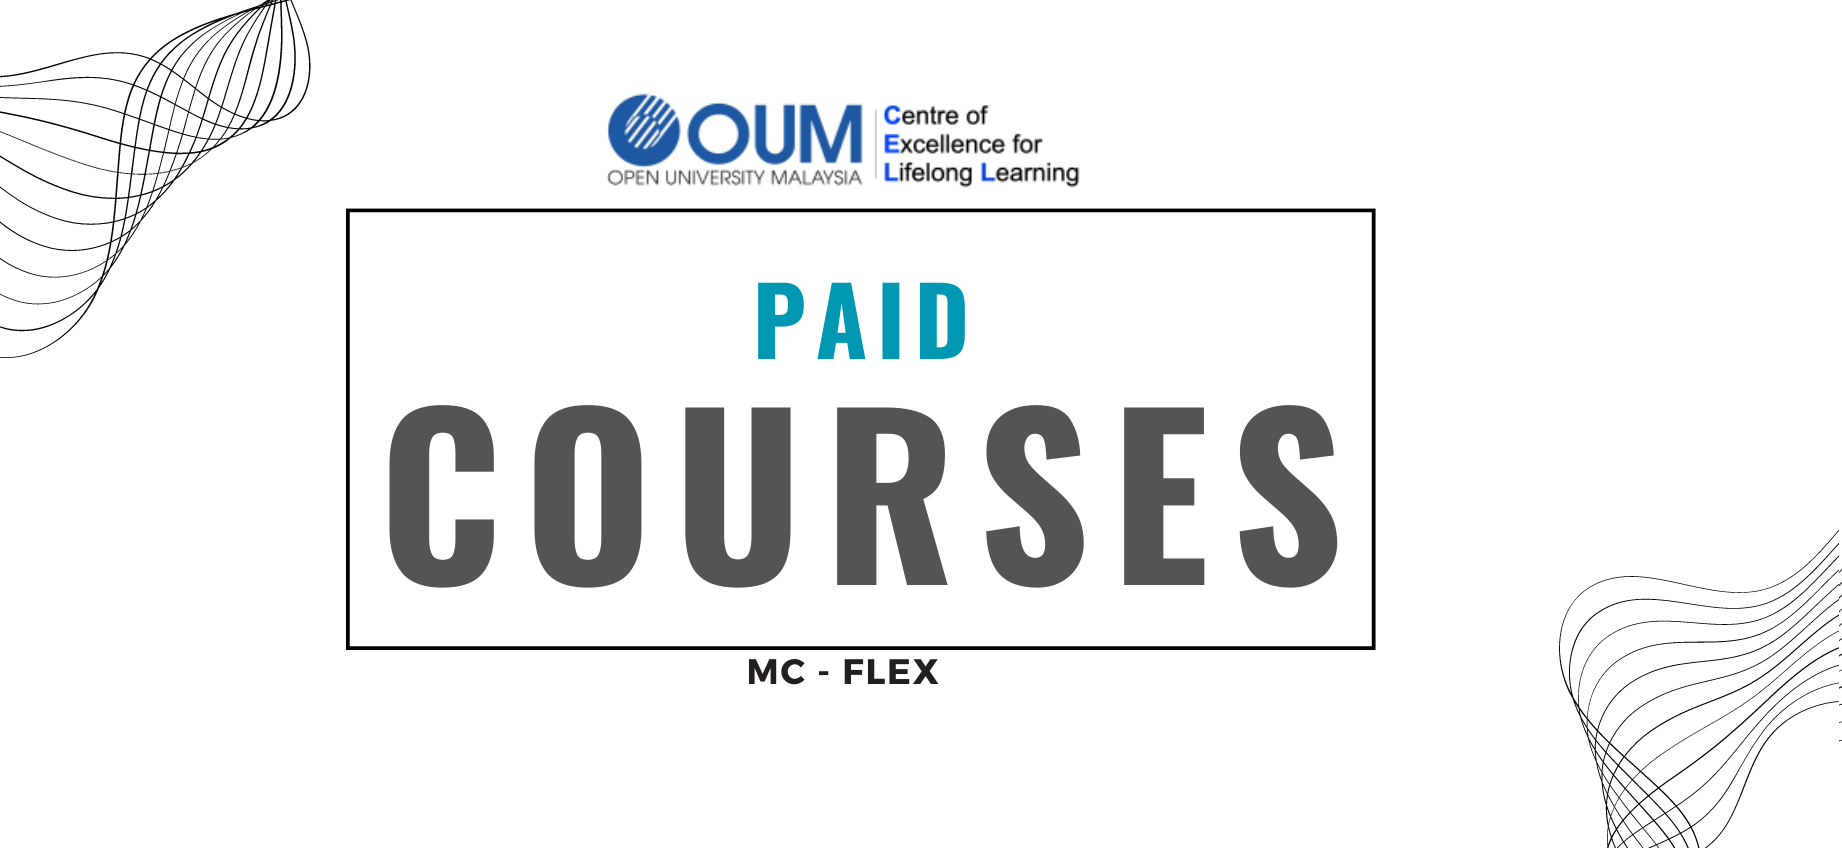 PAID COURSES